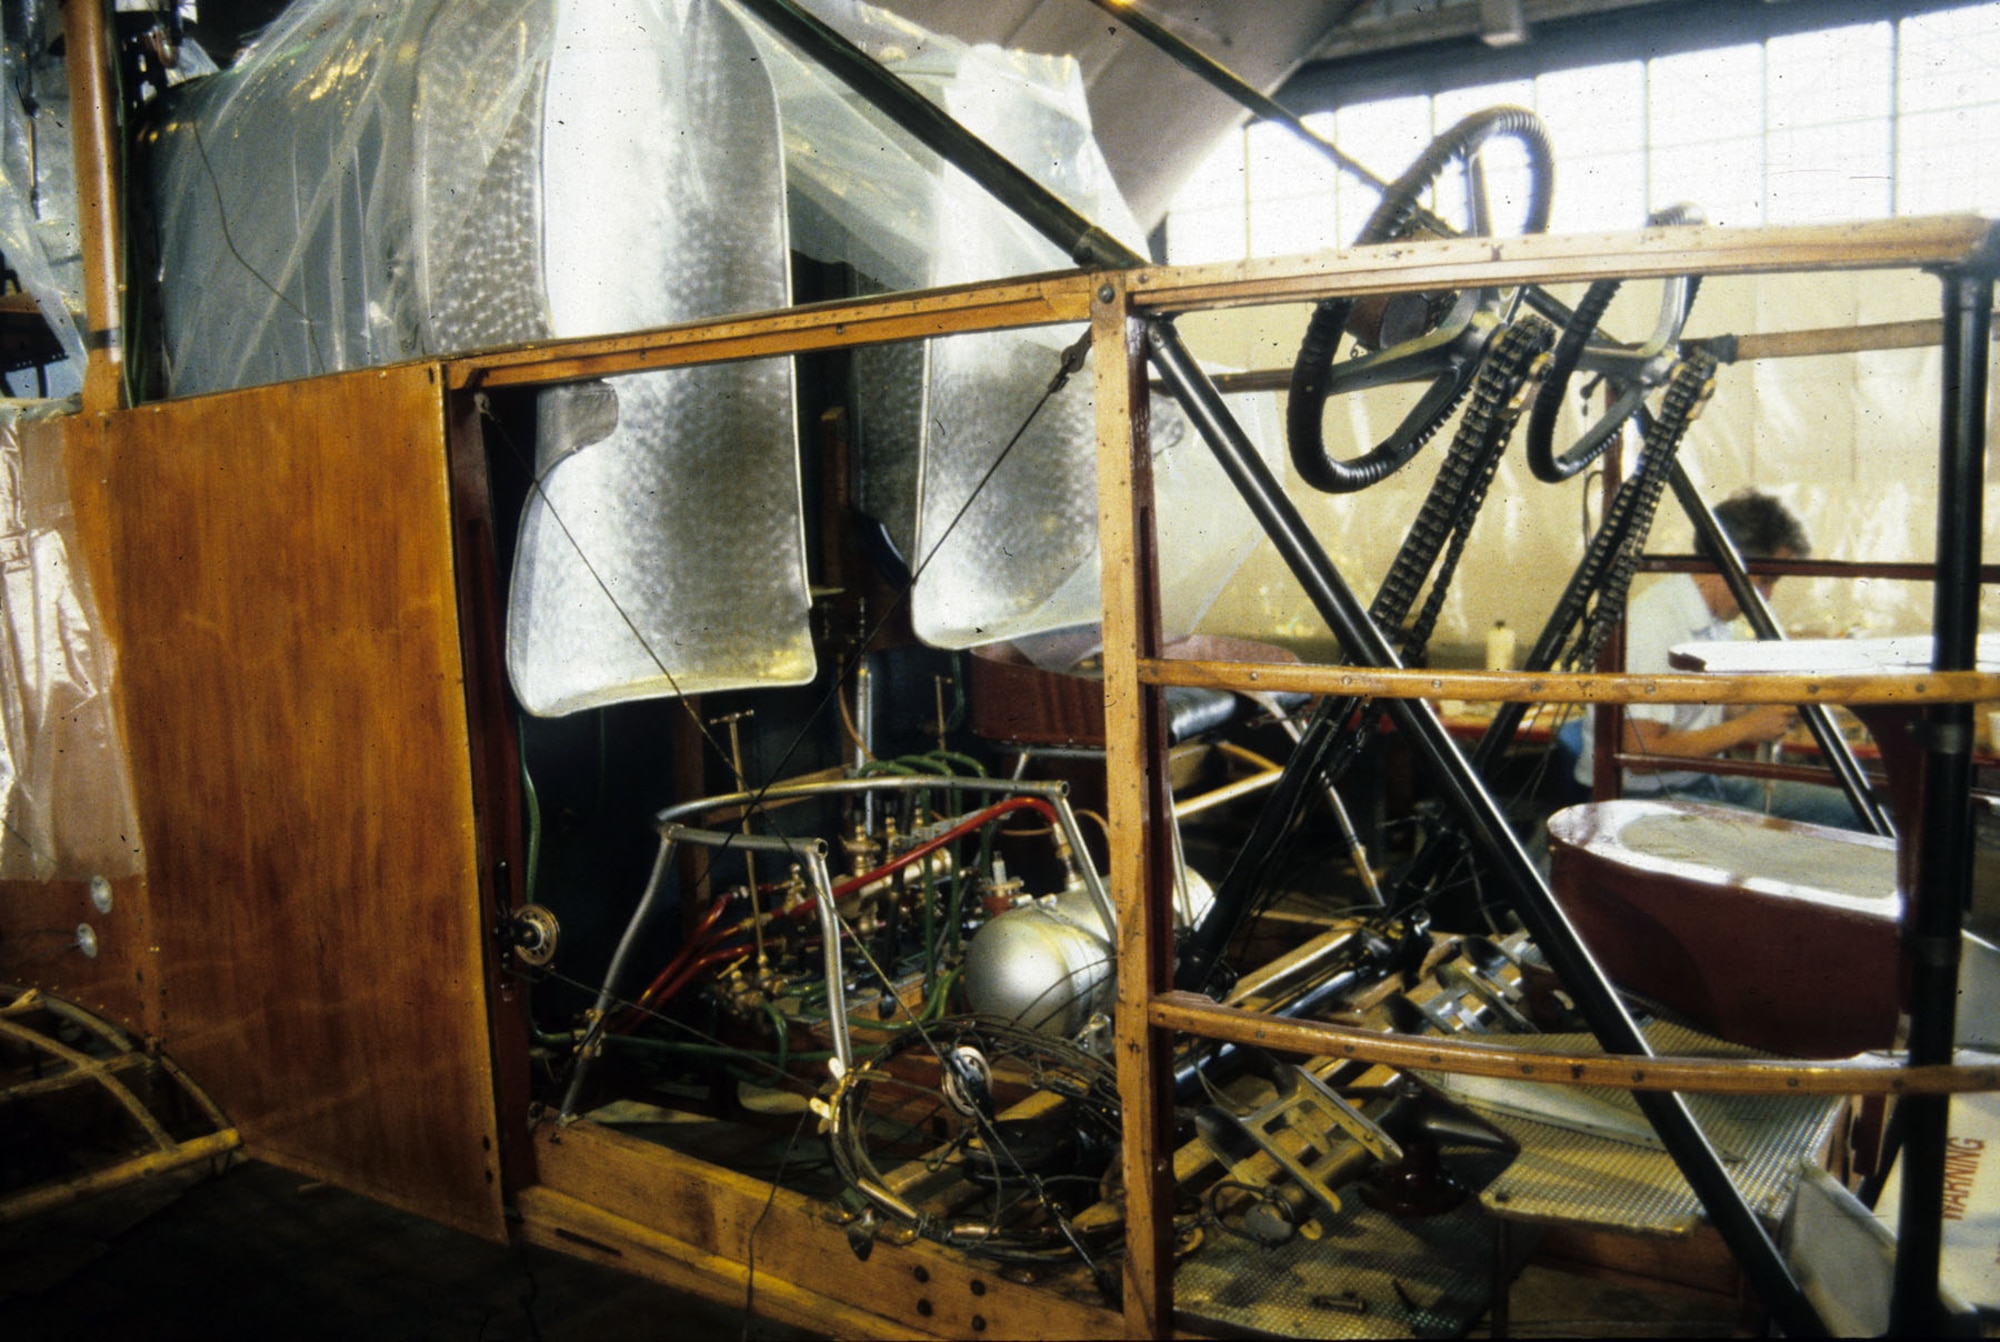 DAYTON, Ohio - The Caproni Ca. 36 bomber cockpit at the National Museum of the U.S. Air Force. (U.S. Air Force photo)